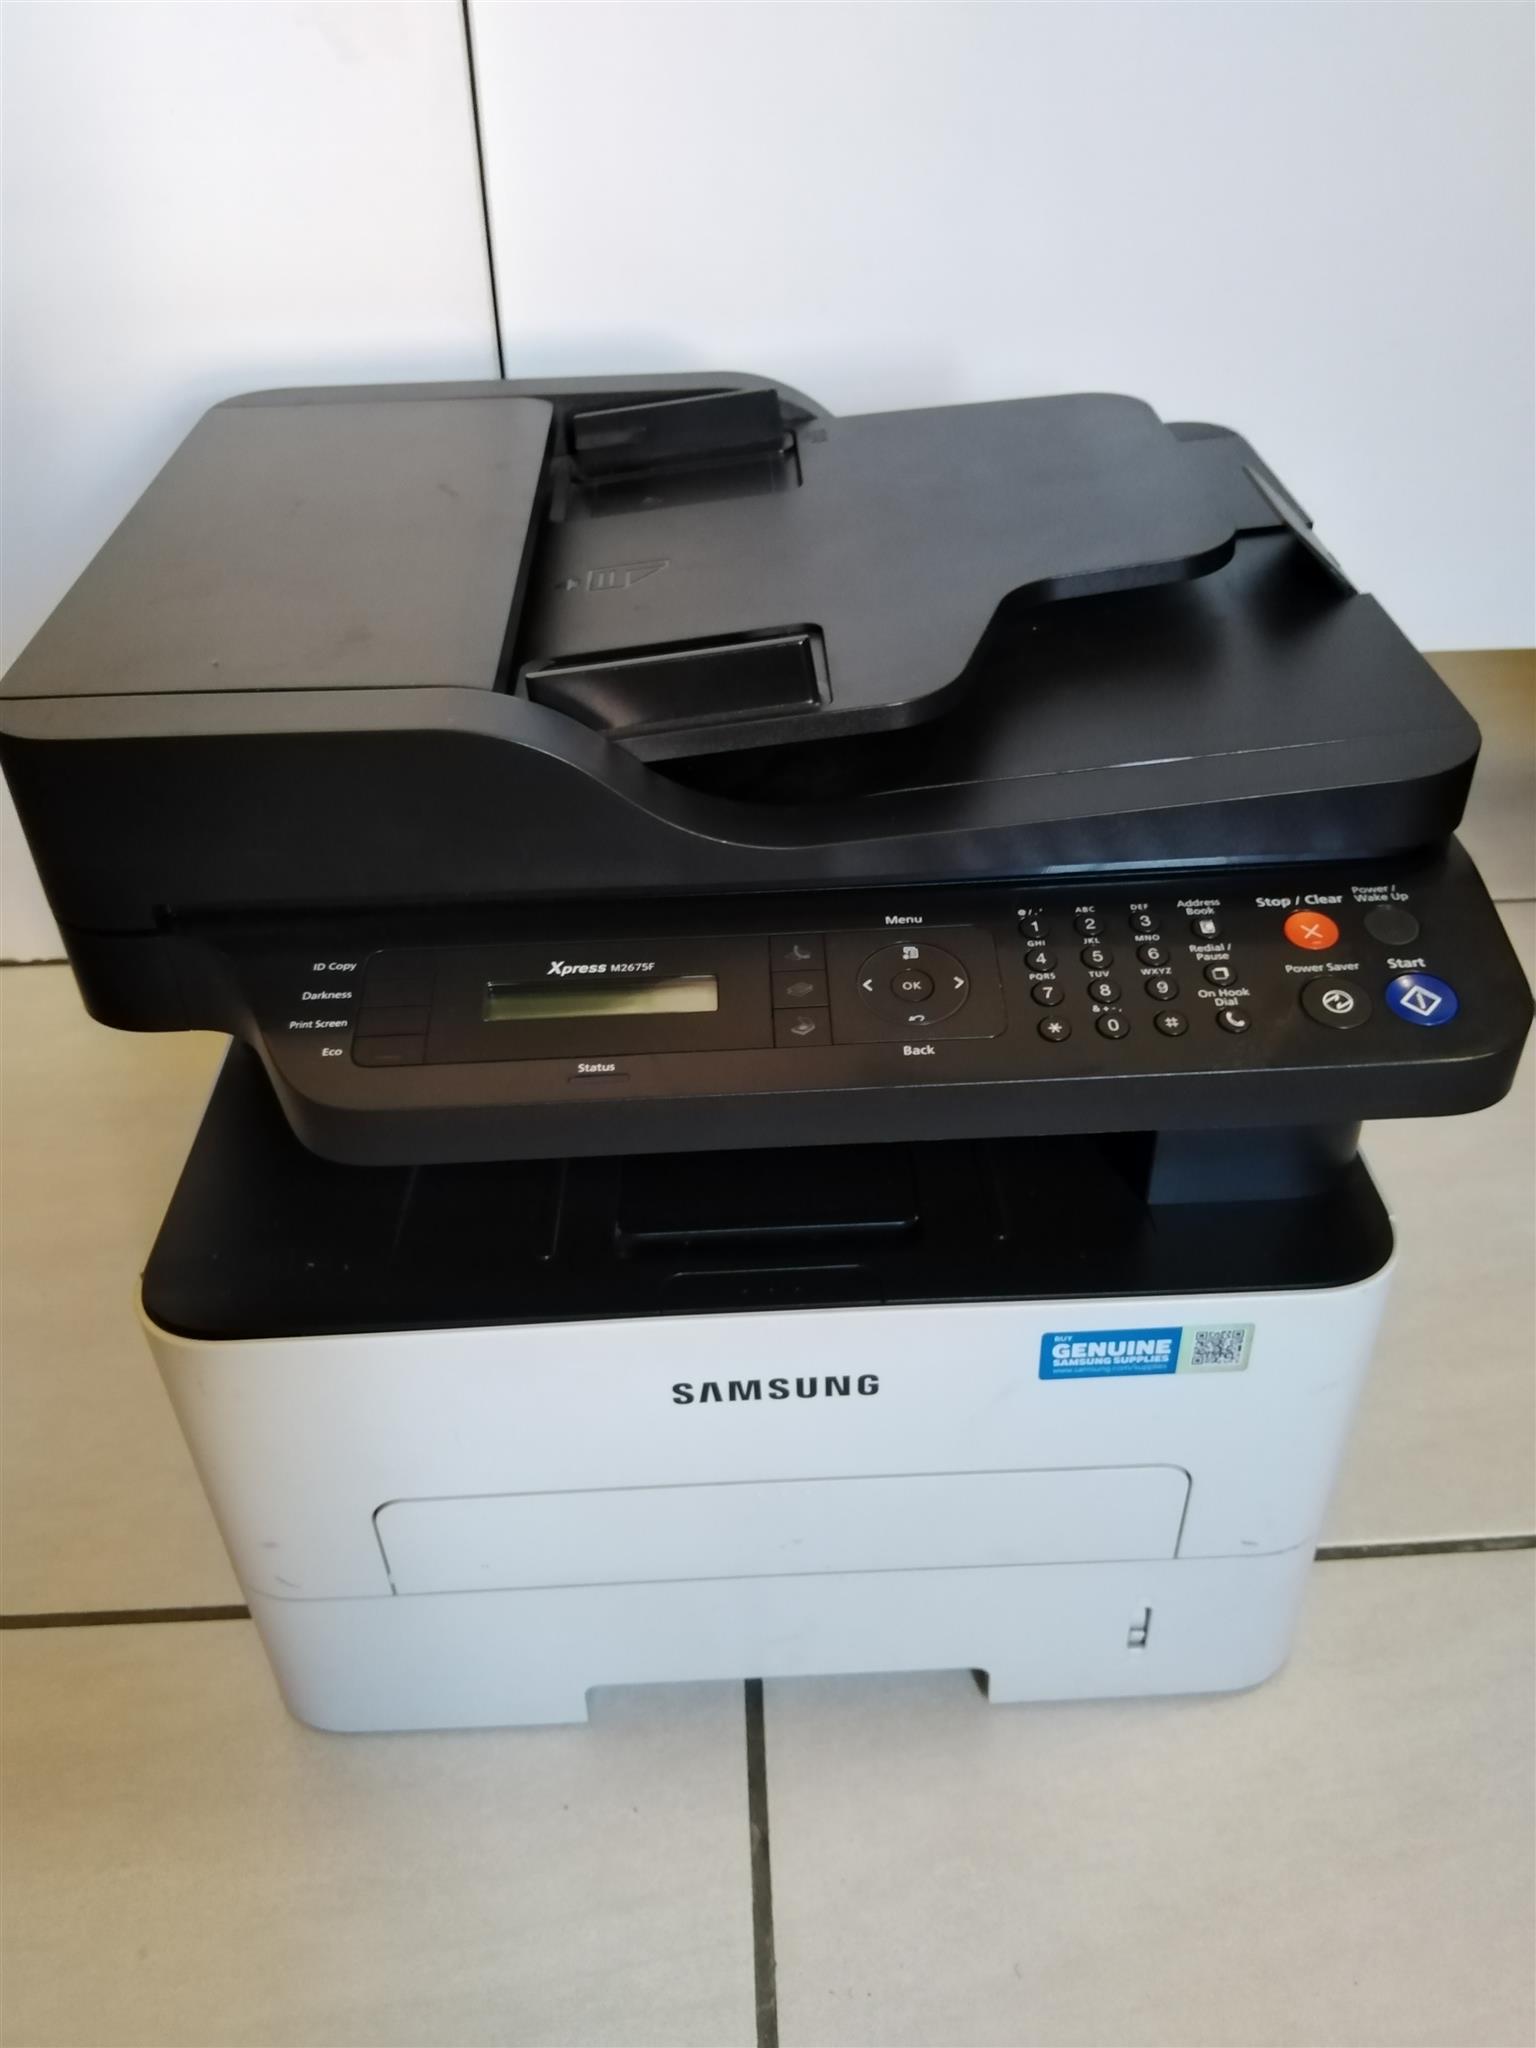 Compatible with one pasta Samsung Laser Printer | Junk Mail